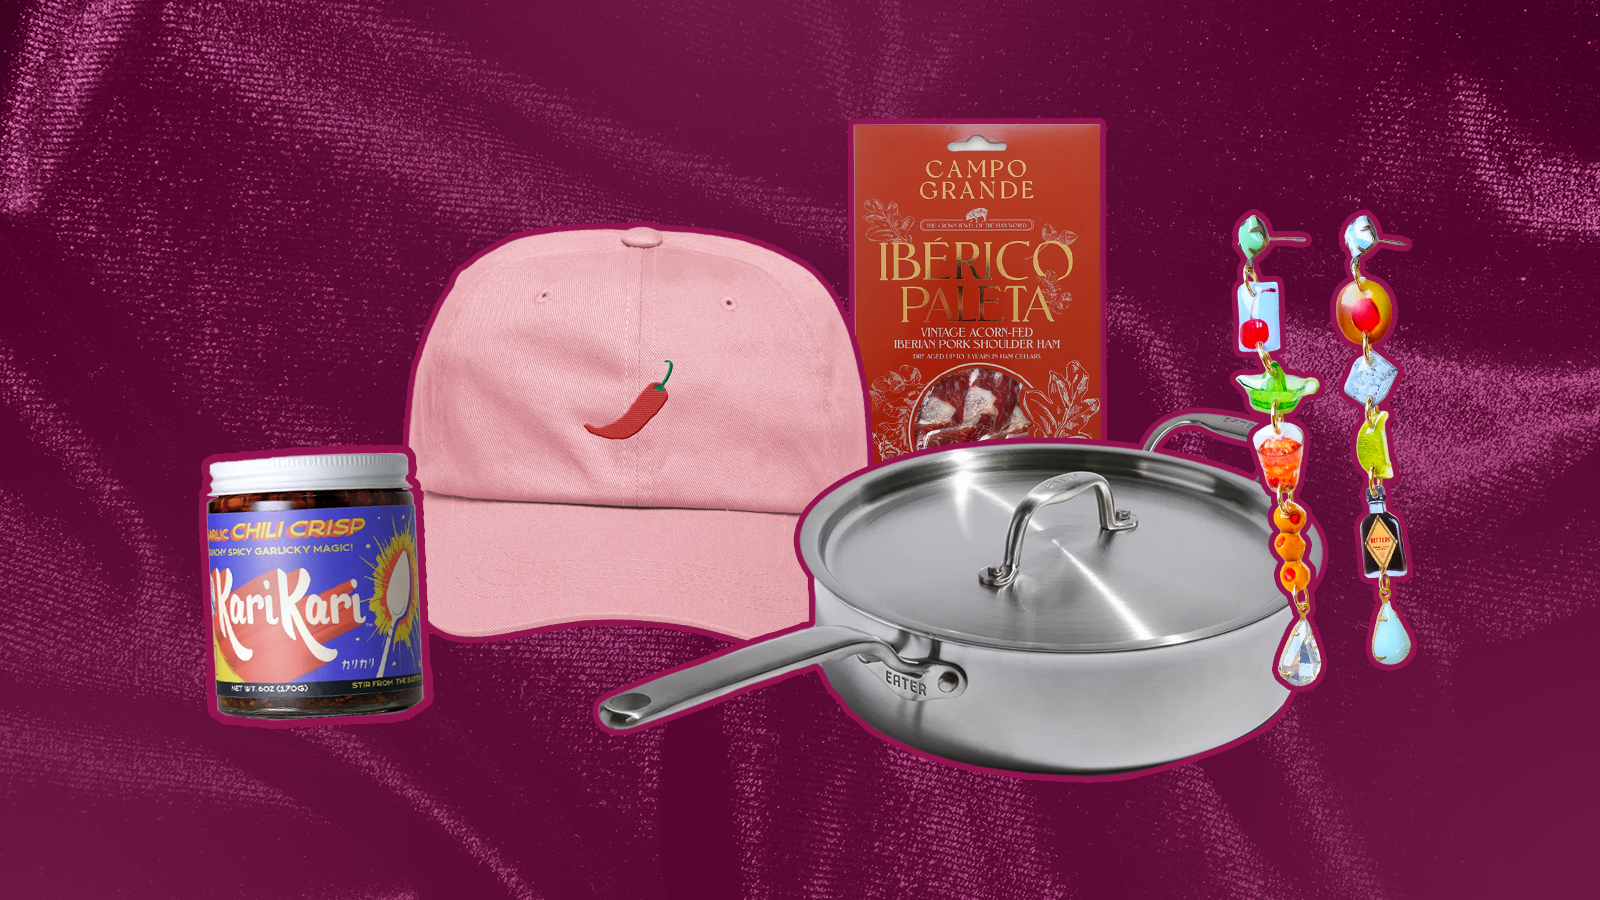 A collection of gifts, including chile crips, a hat, a pan, charcuterie, and earrings, on a dark red background.